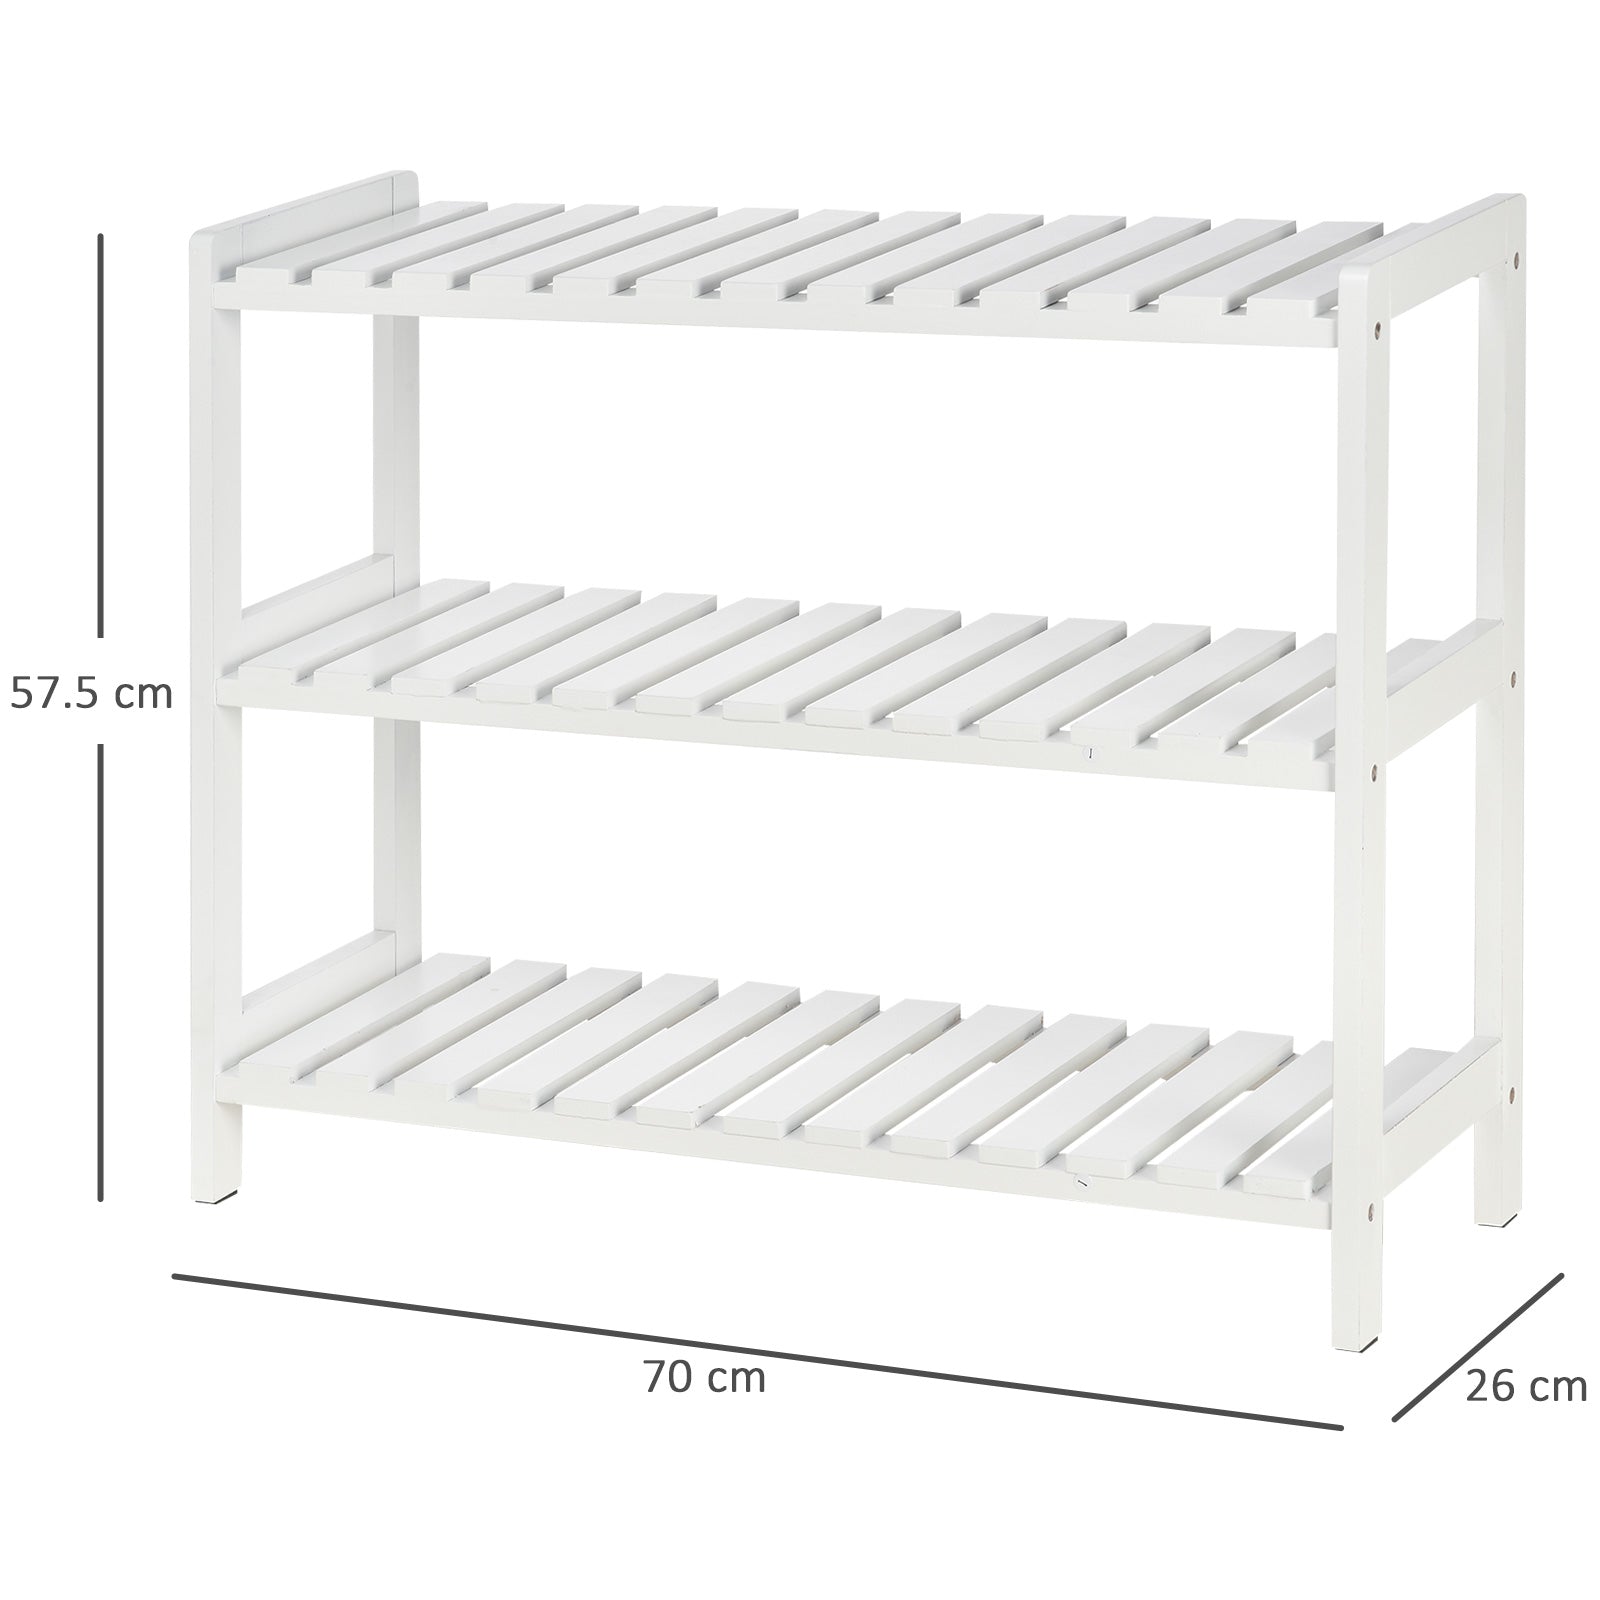 3-Tier Shoe Rack Wood Frame Slatted Shelves Spacious Open Hygienic Storage Home Hallway Furniture Family Guests 70L x 26W x 57.5H cm - White-2